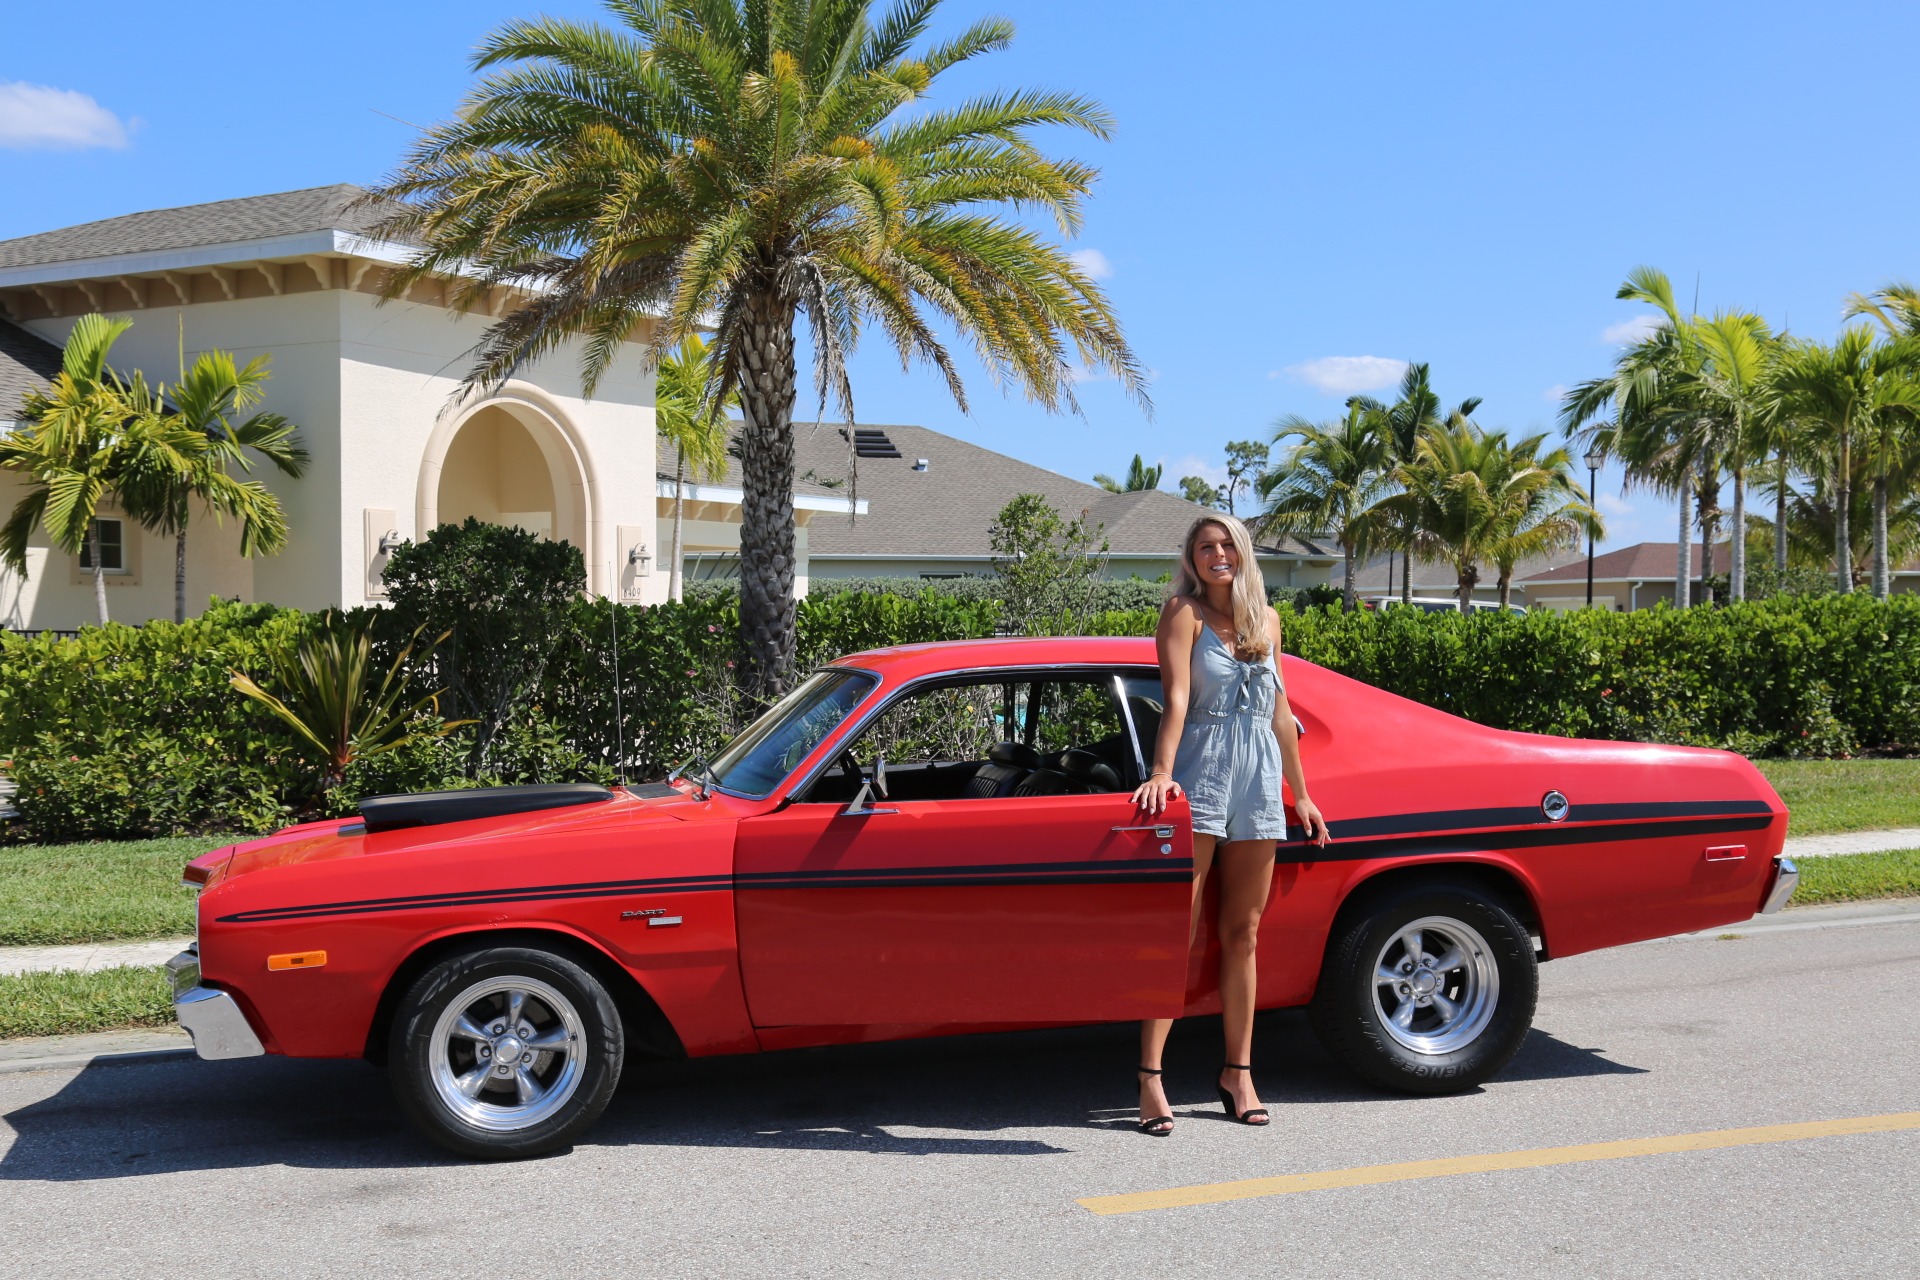 Used 1973 Dodge Dart Dart V8 Auto for sale Sold at Muscle Cars for Sale Inc. in Fort Myers FL 33912 2